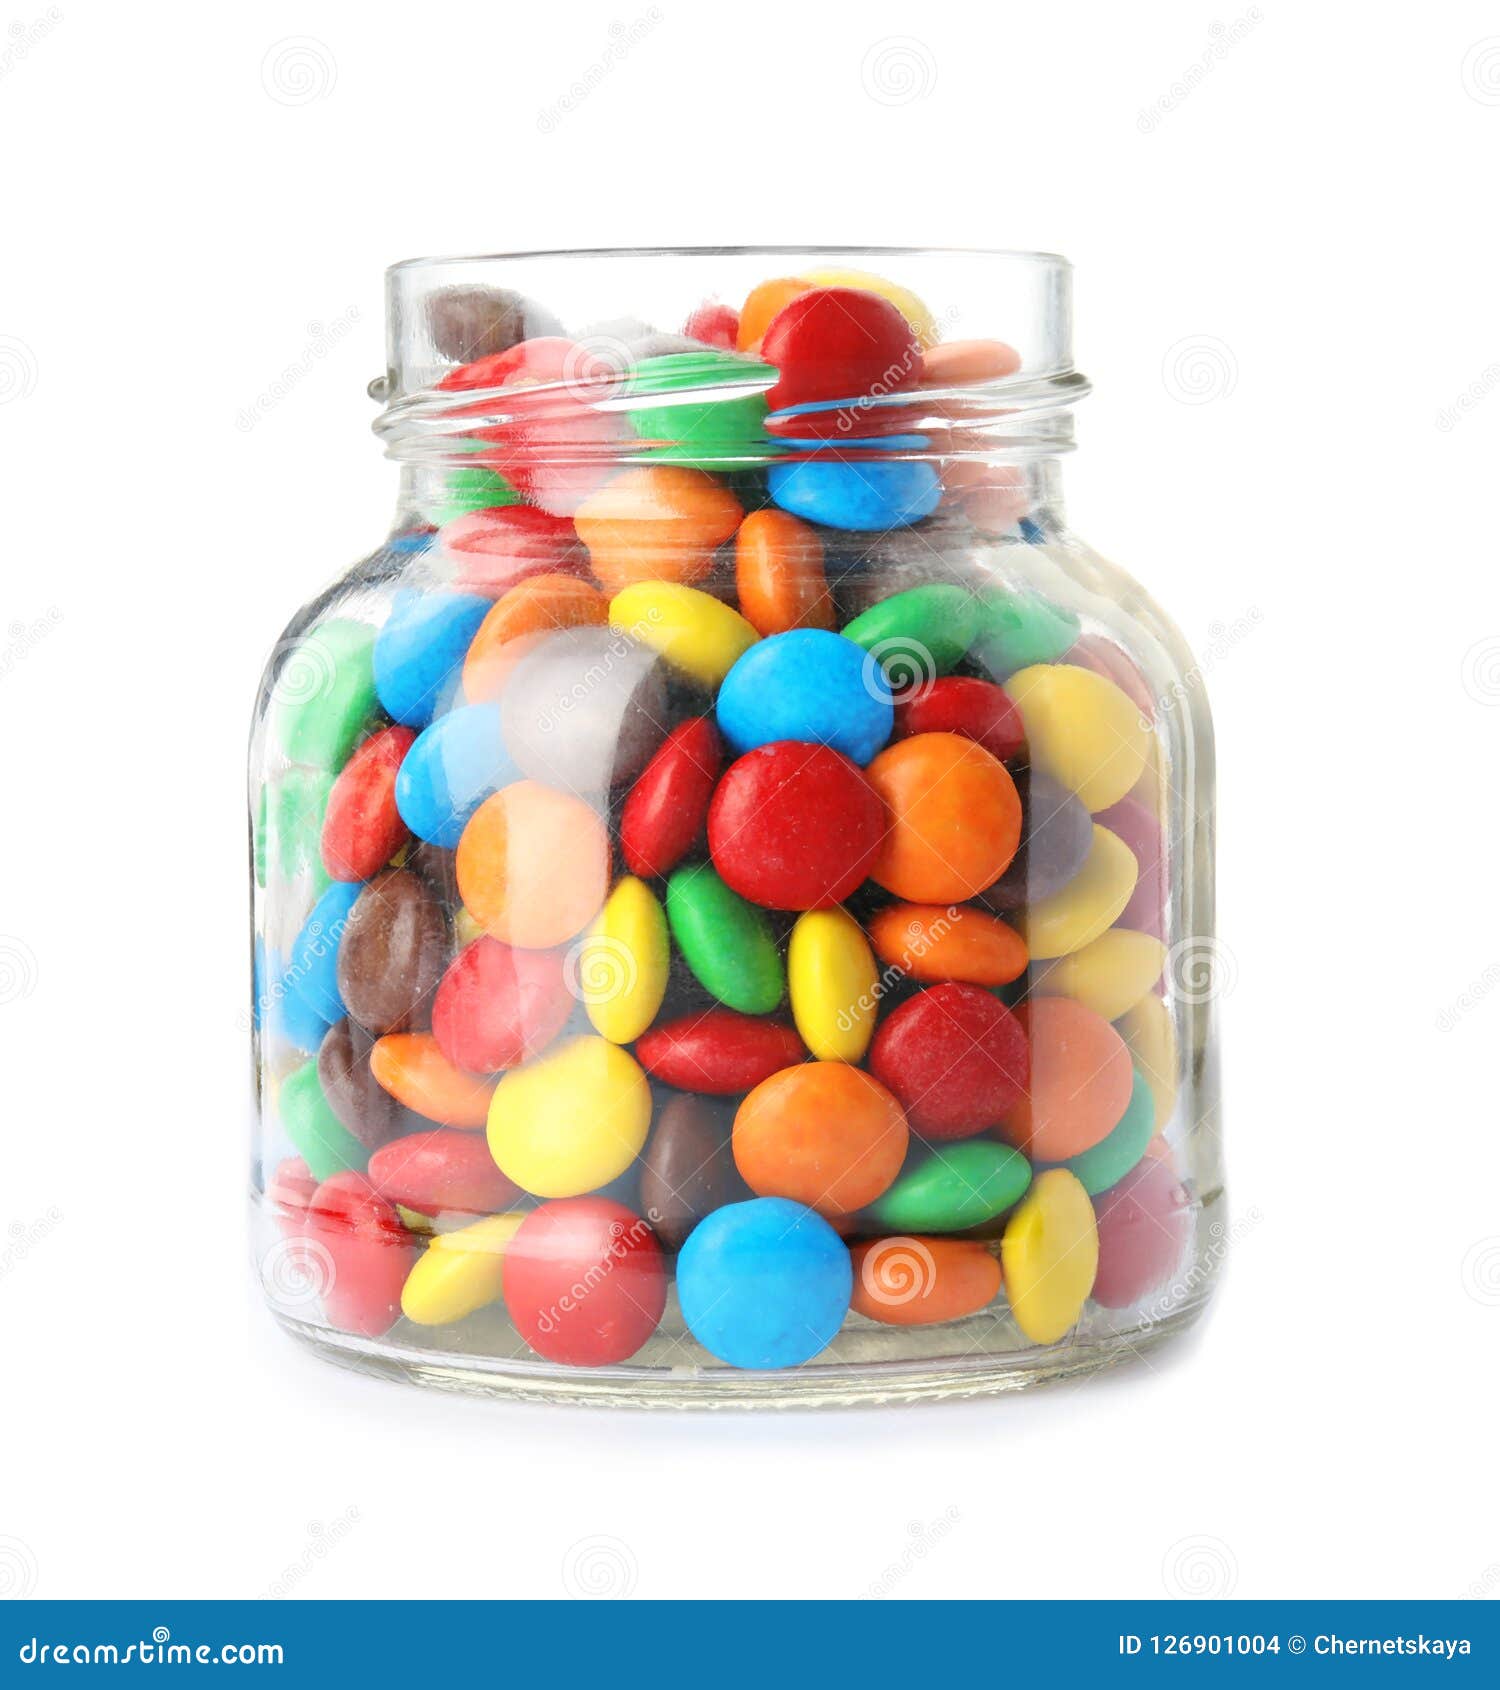 Jar with colorful candies stock photo. Image of object - 126901004